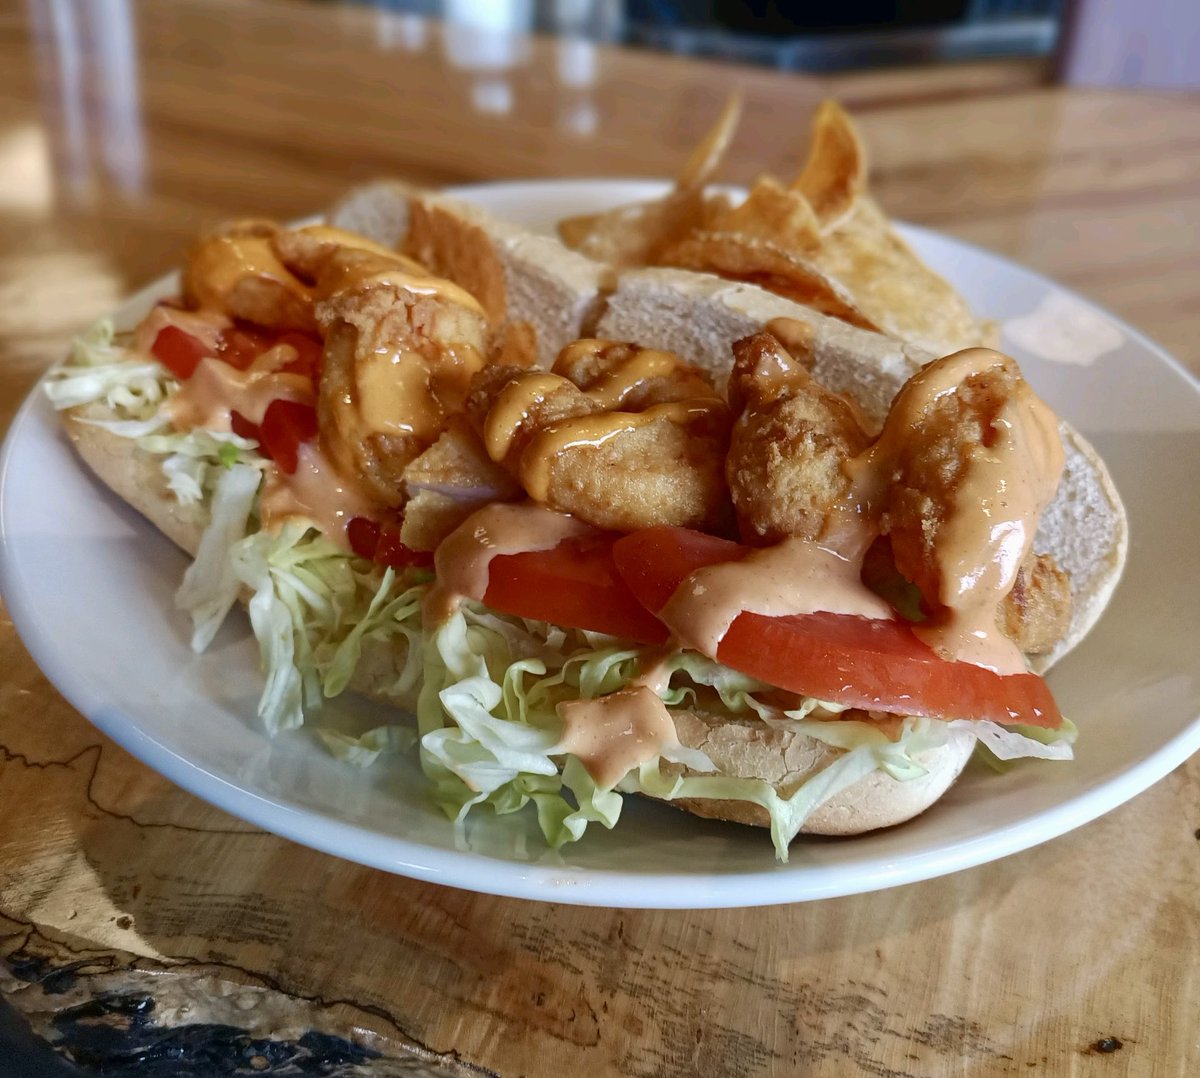 Two new must try meals starting today at the Common Man Roadside Millyard in Manchester - Uncommon Shrimp Scampi and Shrimp Po Boy! @ManchInkLink @WMUR9 @NHLRA @UnionLeader @TheHippoNH @TrubyHilton #manchesternh #newhampshire